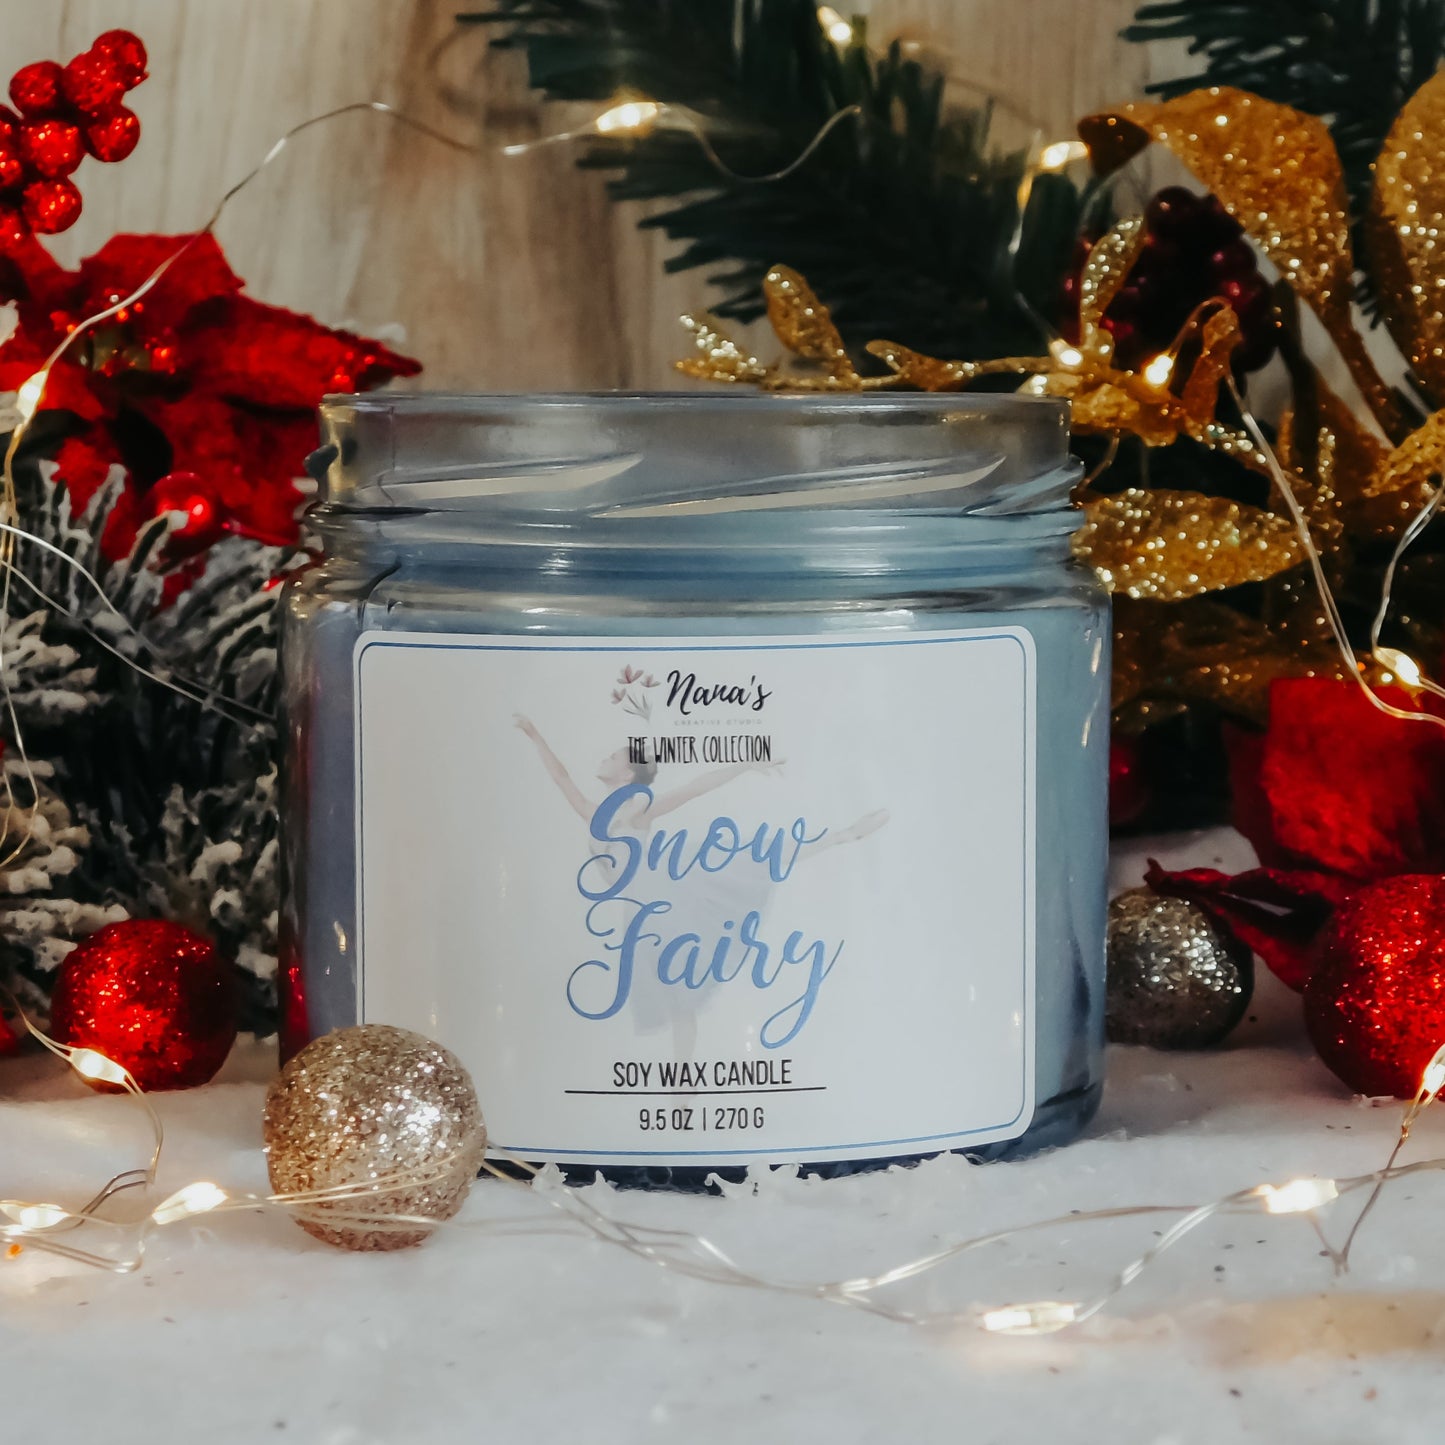 Snow Fairy Soy Wax Candle